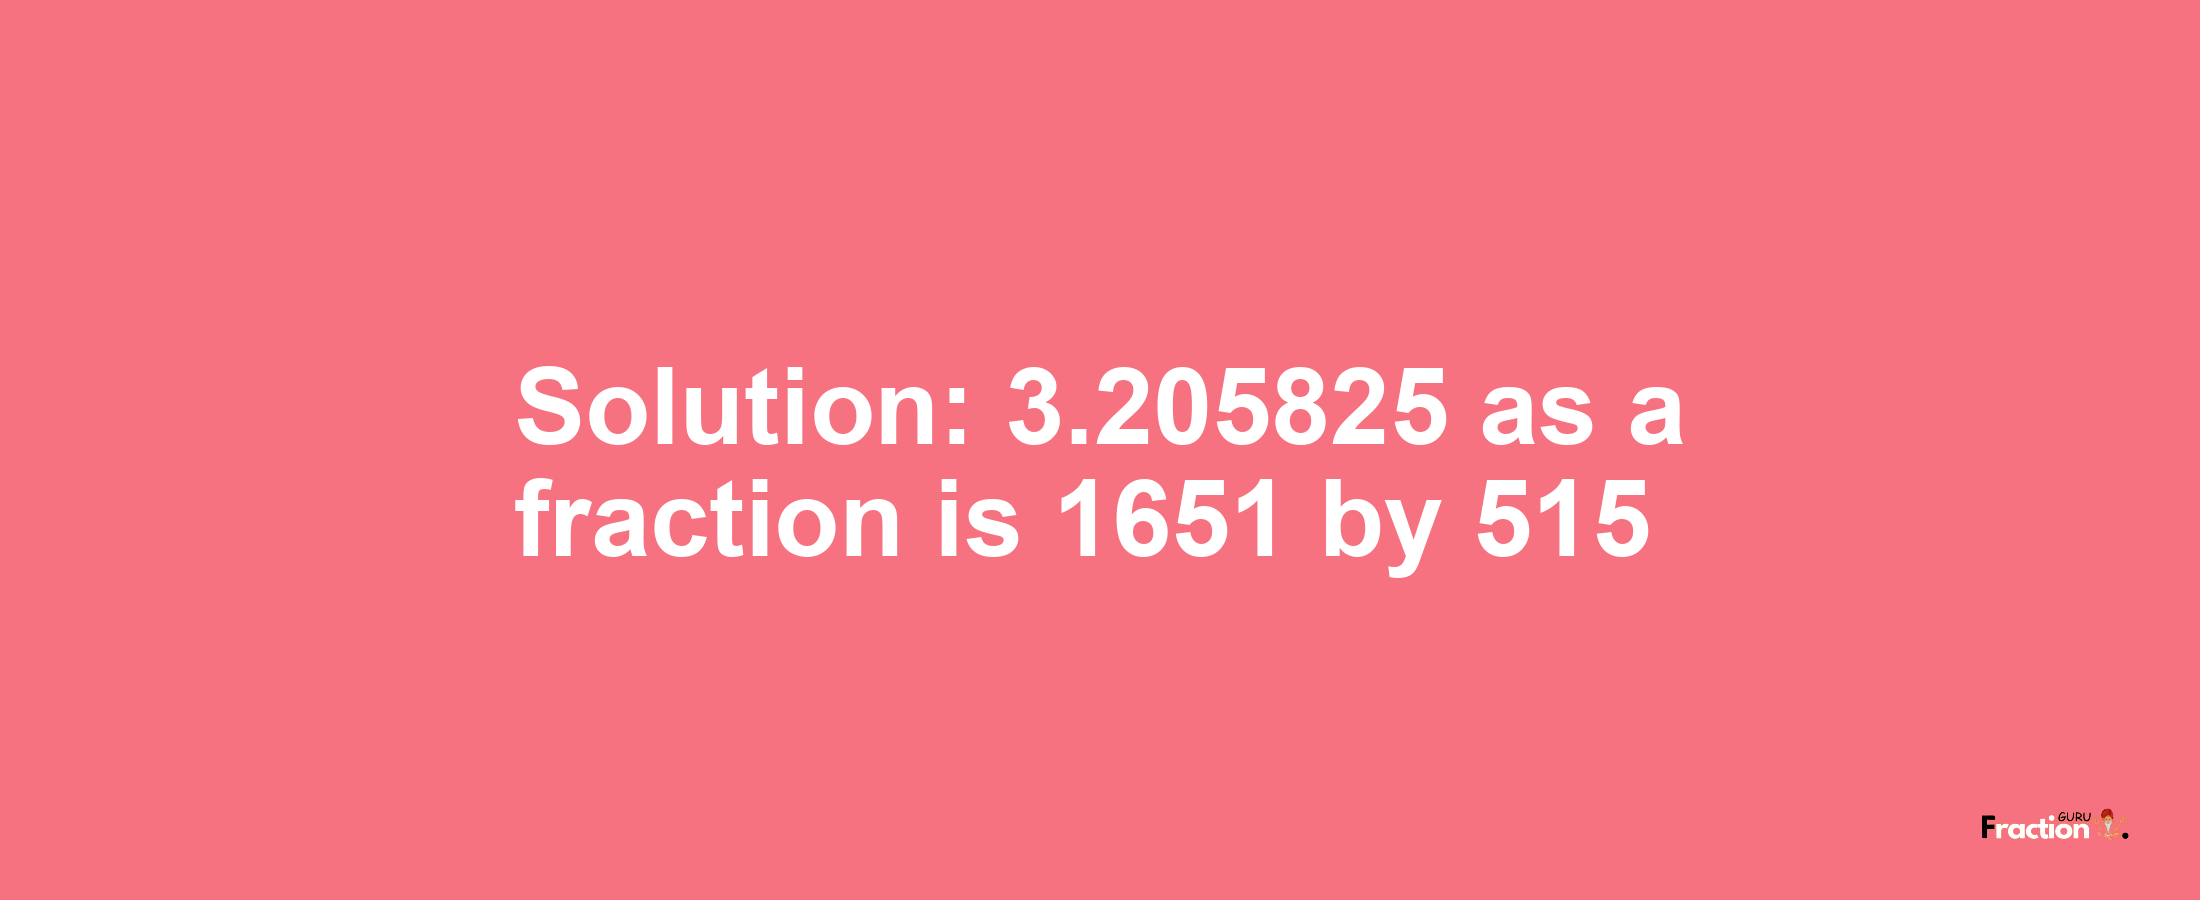 Solution:3.205825 as a fraction is 1651/515